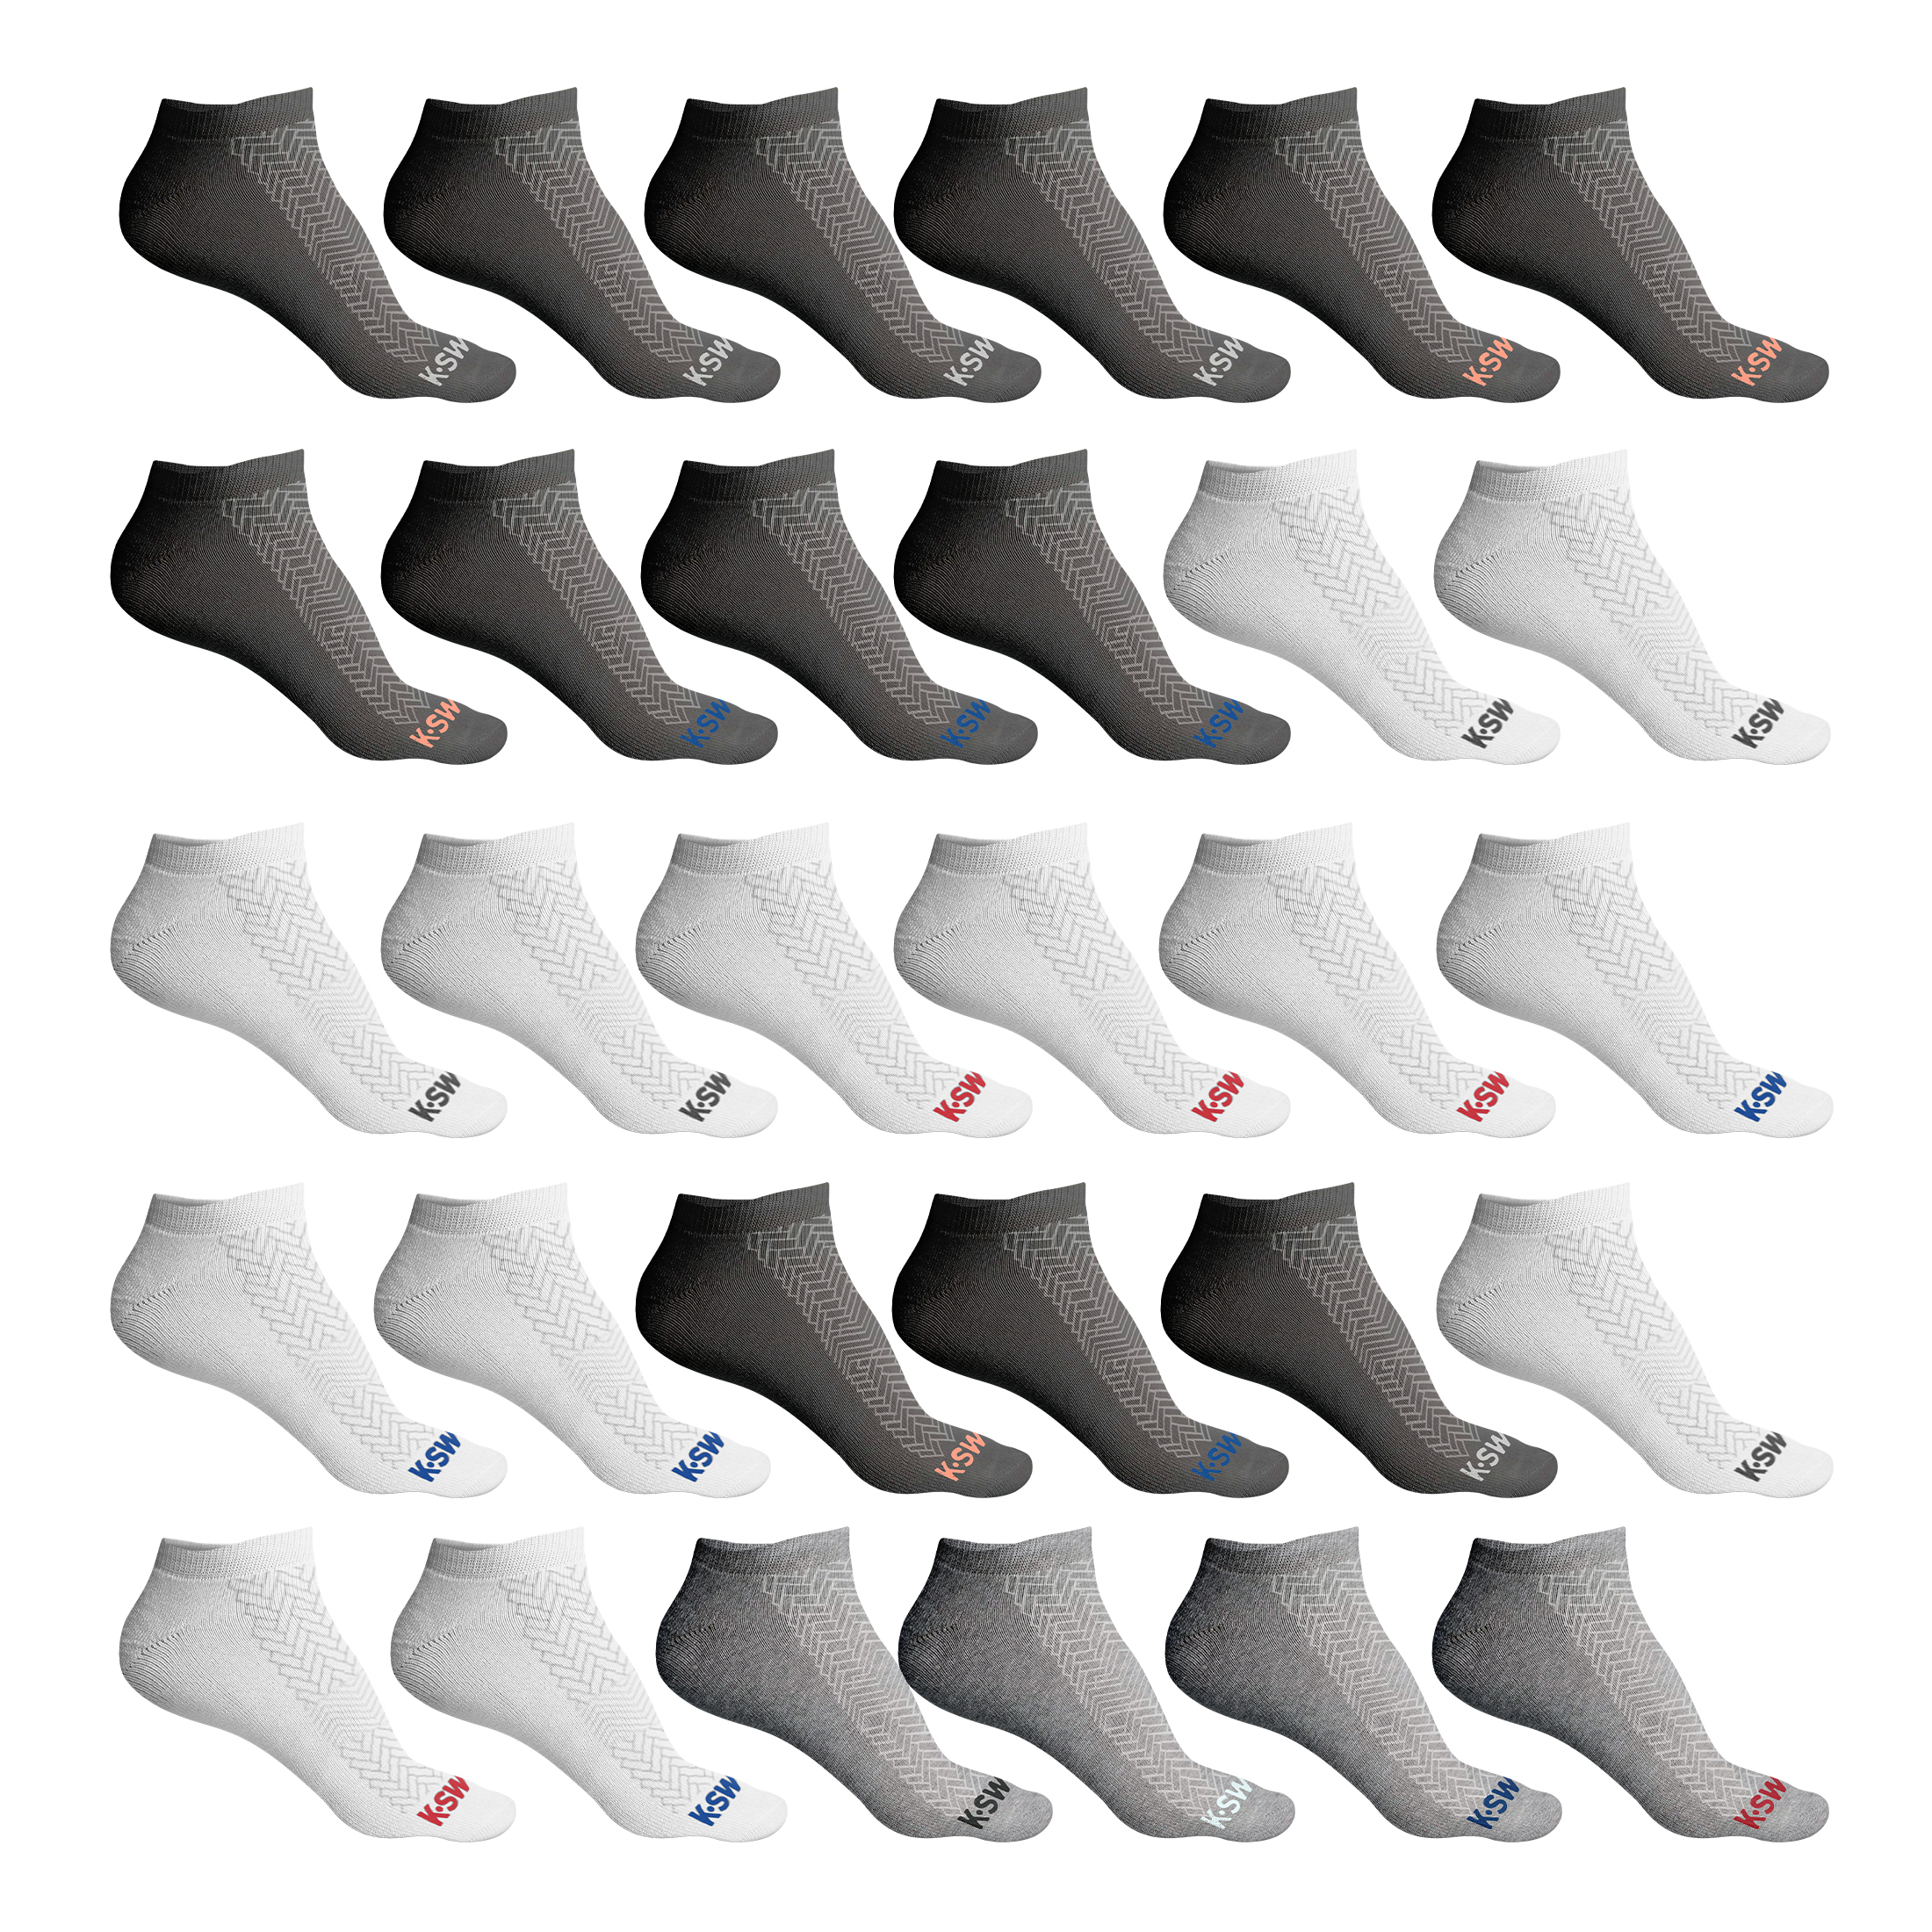 20-Pairs: Men's Athletic Comfort No Show Low Cut Ankle Socks - Style 2